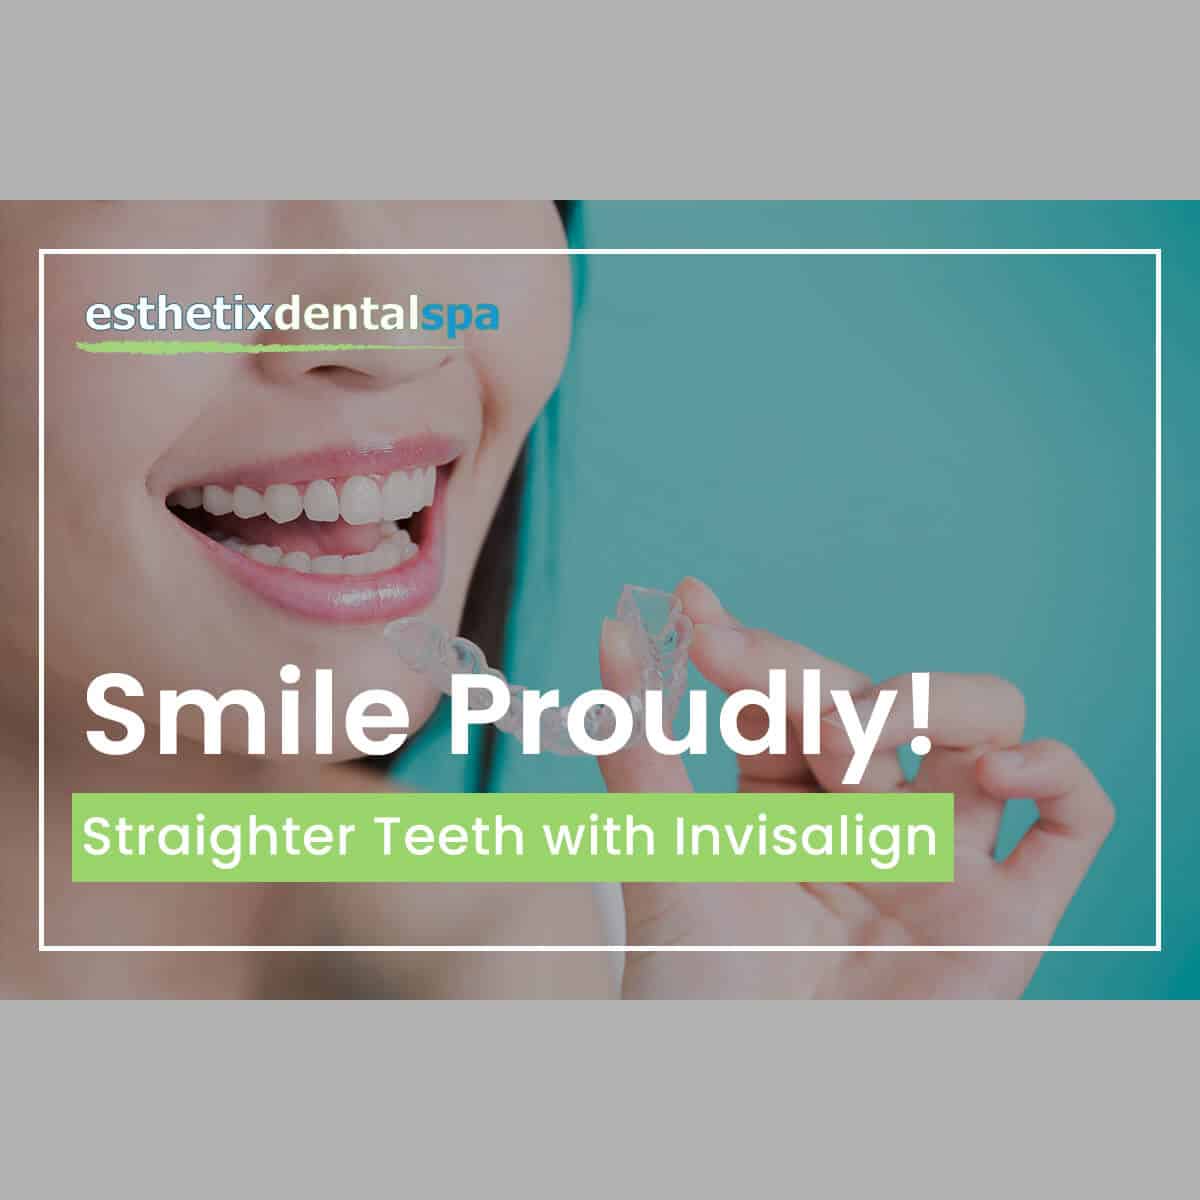 Smile Proudly! Straighter Teeth With Invisalign